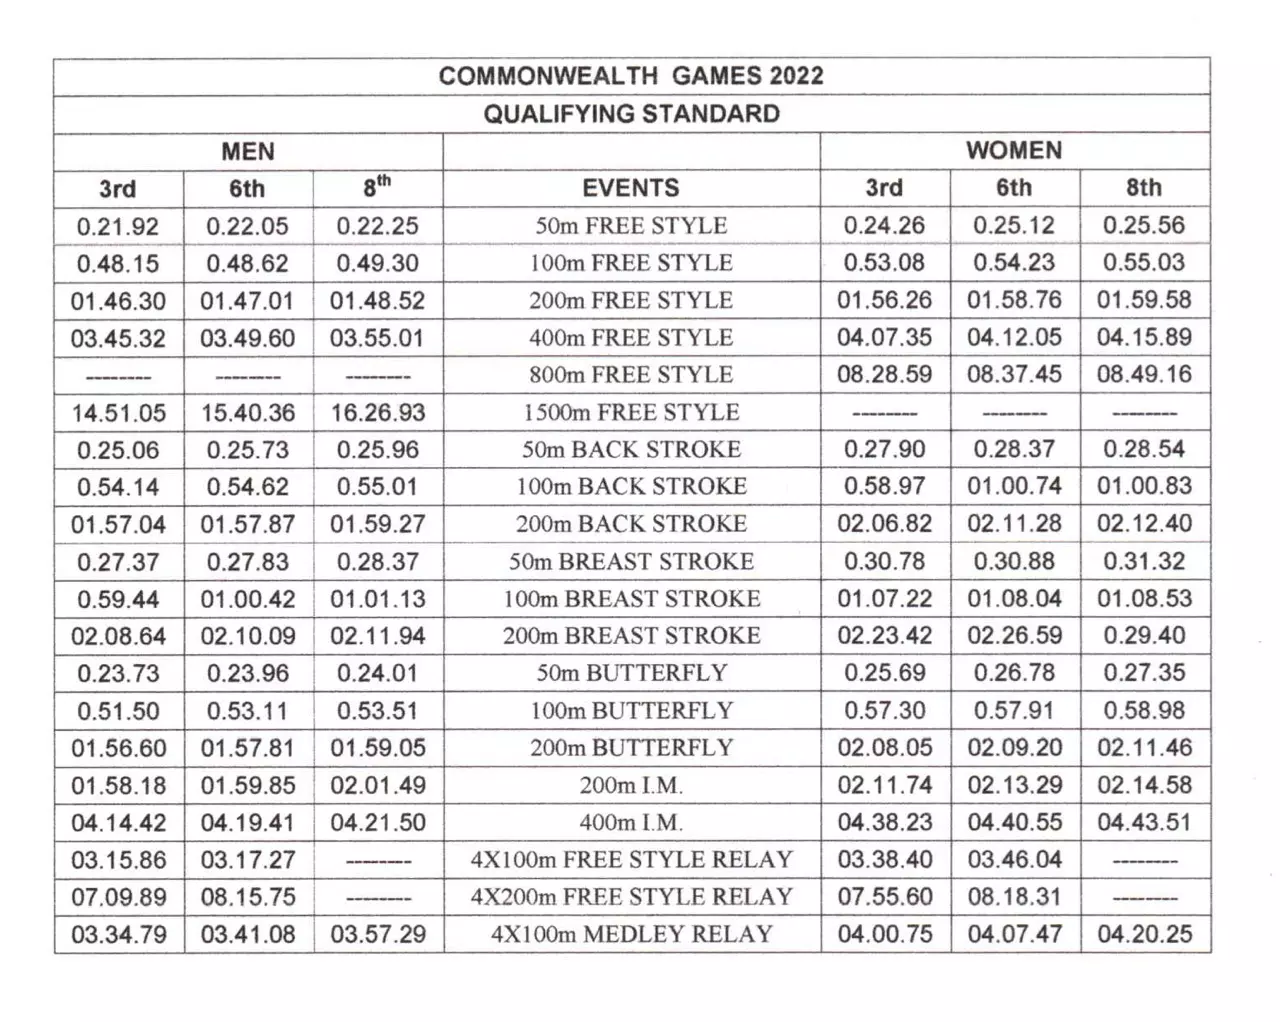 The qualifying standards for Indian swimmers - men and women, for the CWG 2022